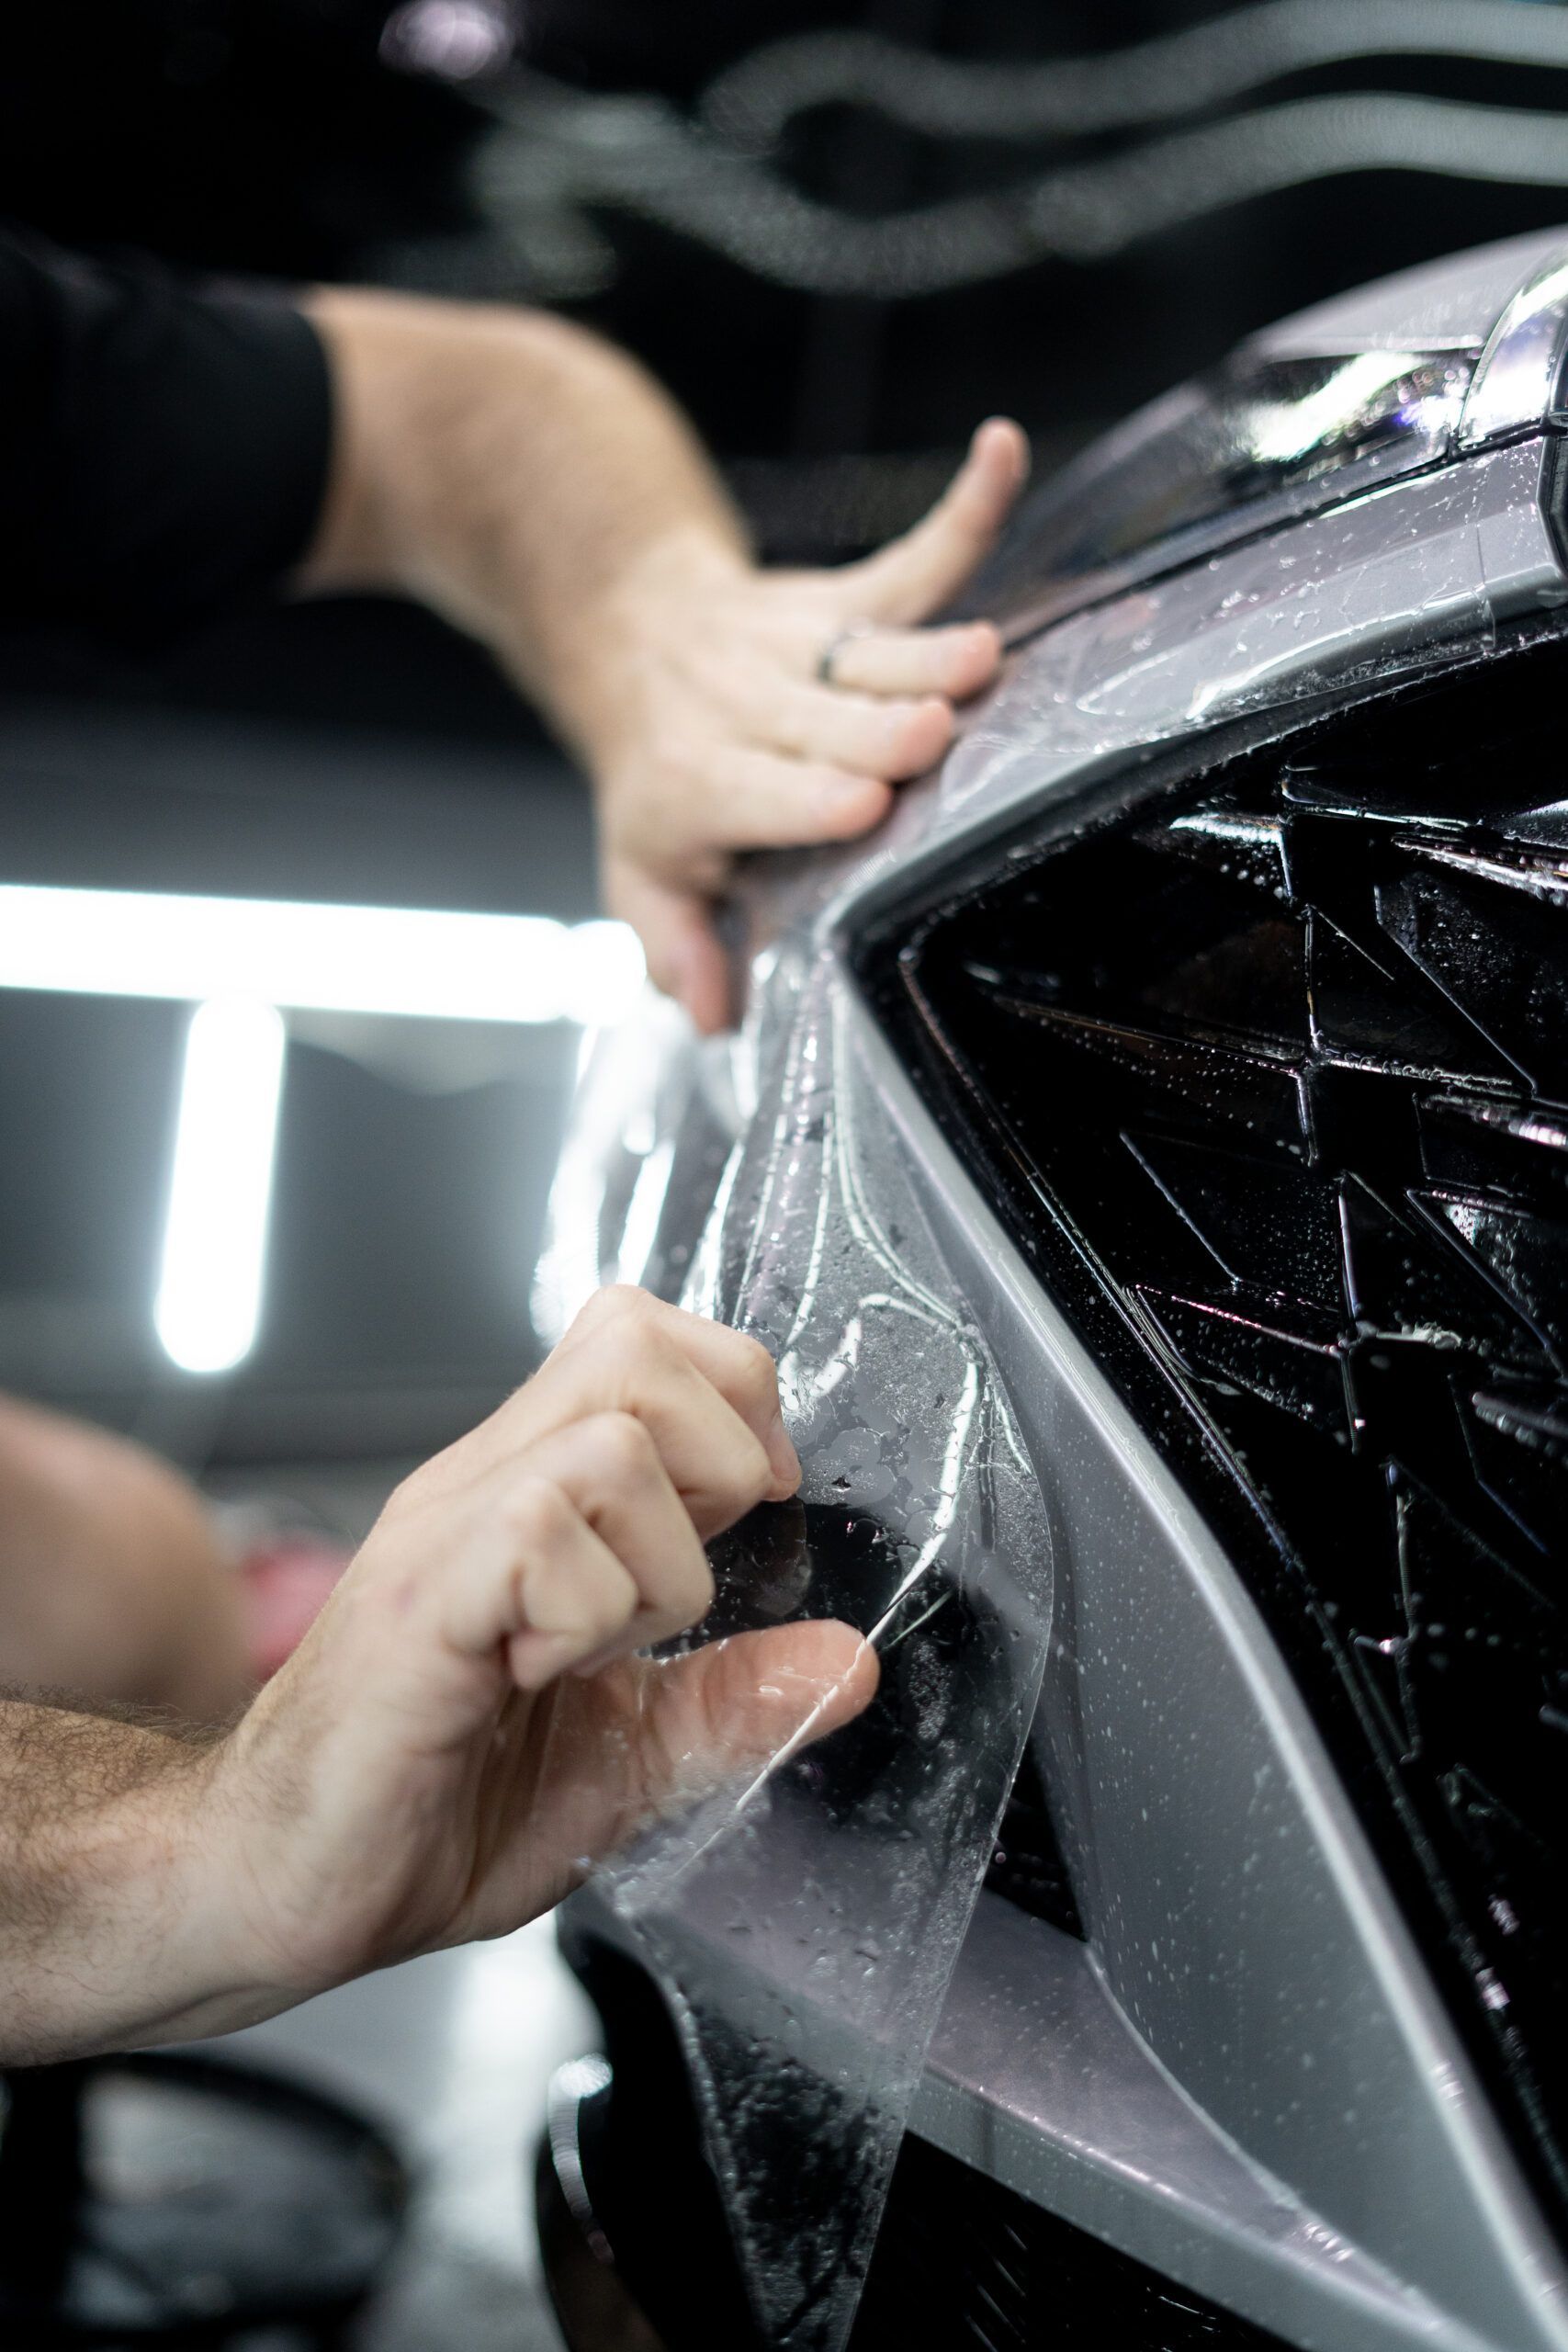 A person is applying a protective film to the front of a car.